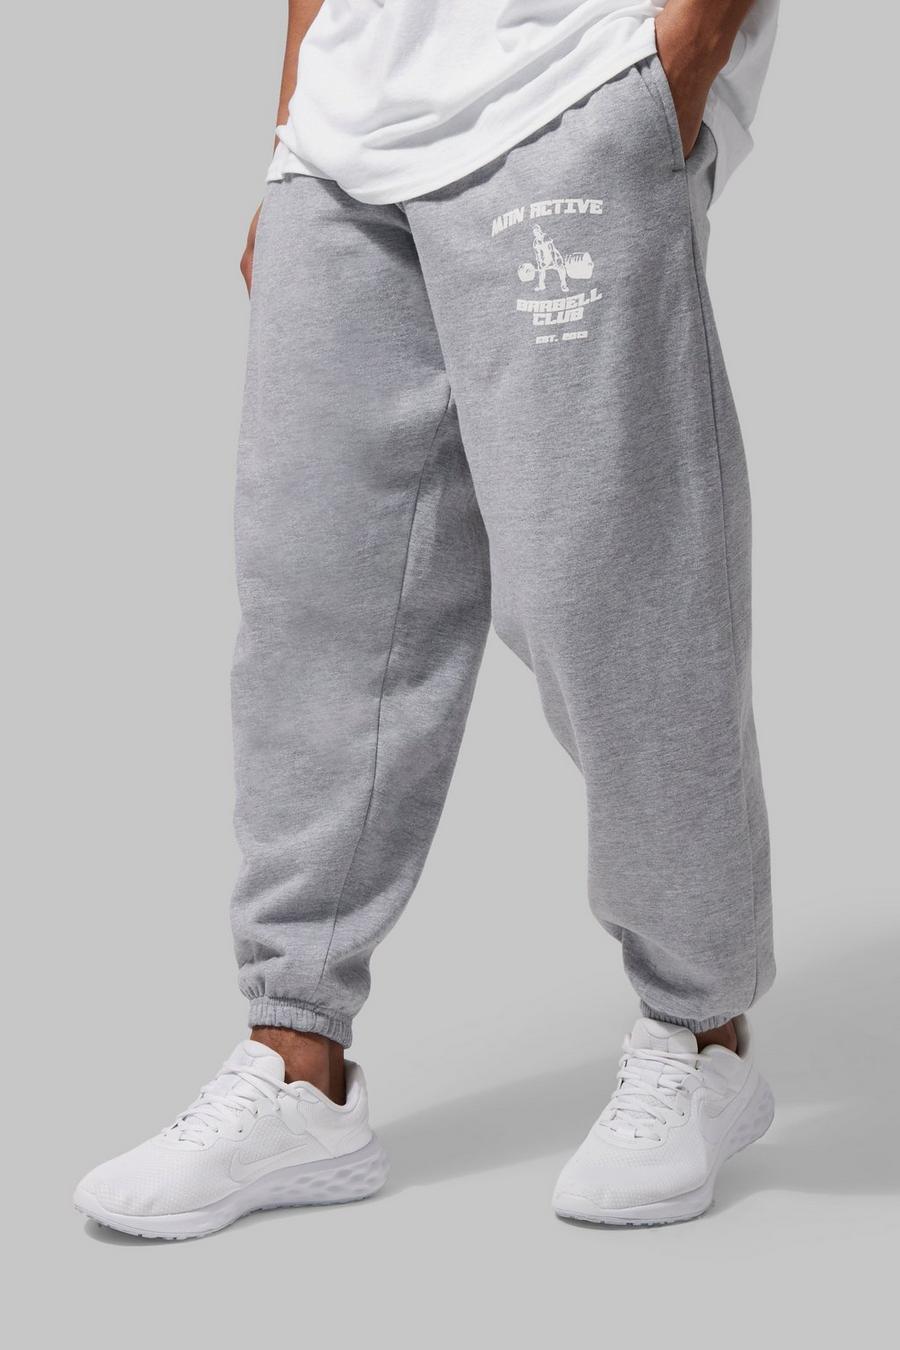 Sweatpants for Women Baggy Joggers Pants Cute Plus Size Oversized Sweat  Pants with Pockets